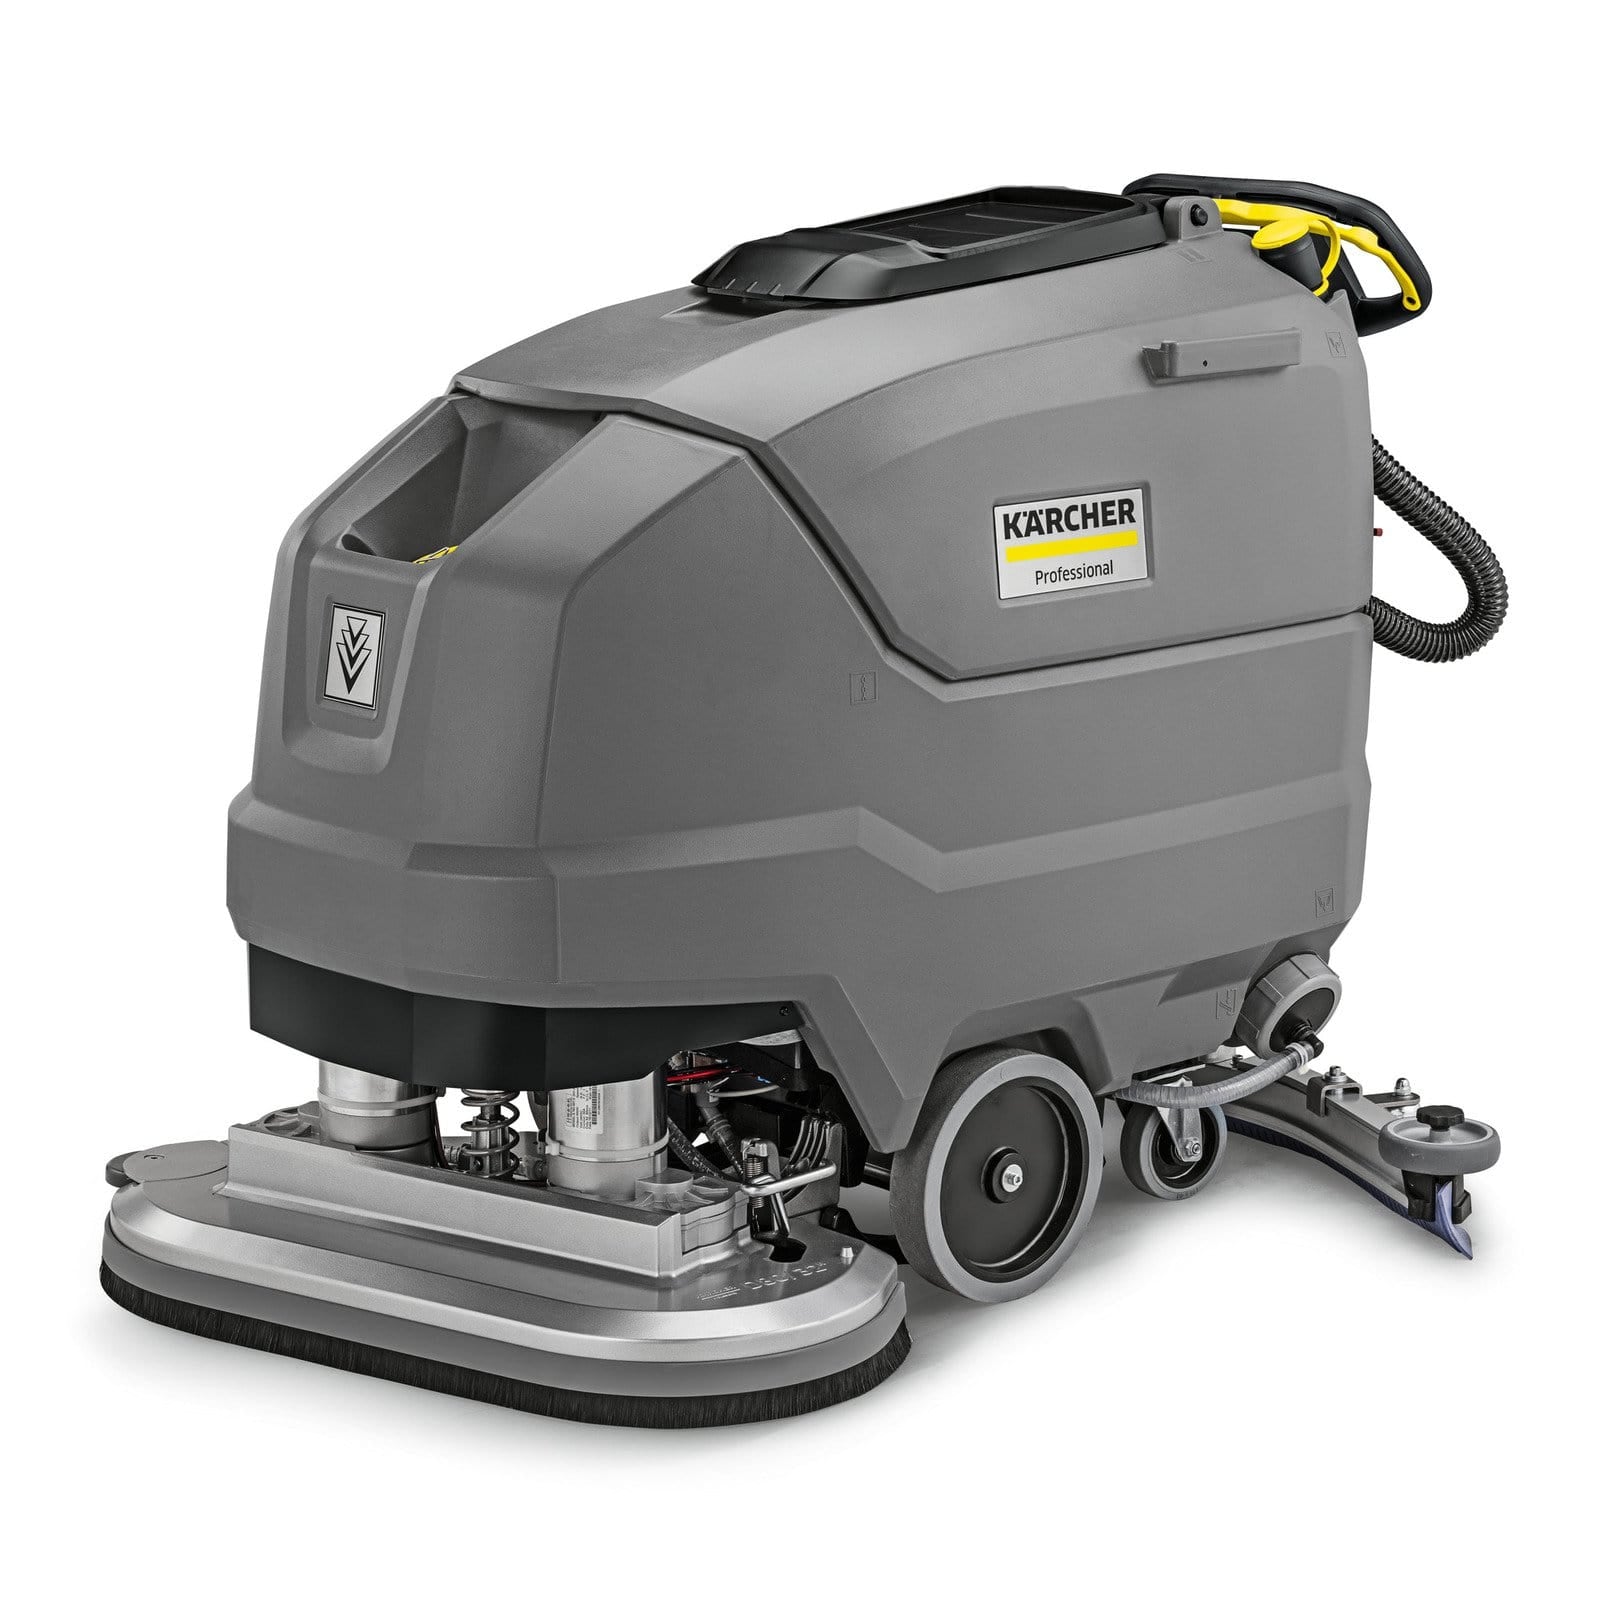 Karcher Scrubber Drier - BD 80/100 W Classic Bp | Supply Master | Accra, Ghana Tools Building Steel Engineering Hardware tool